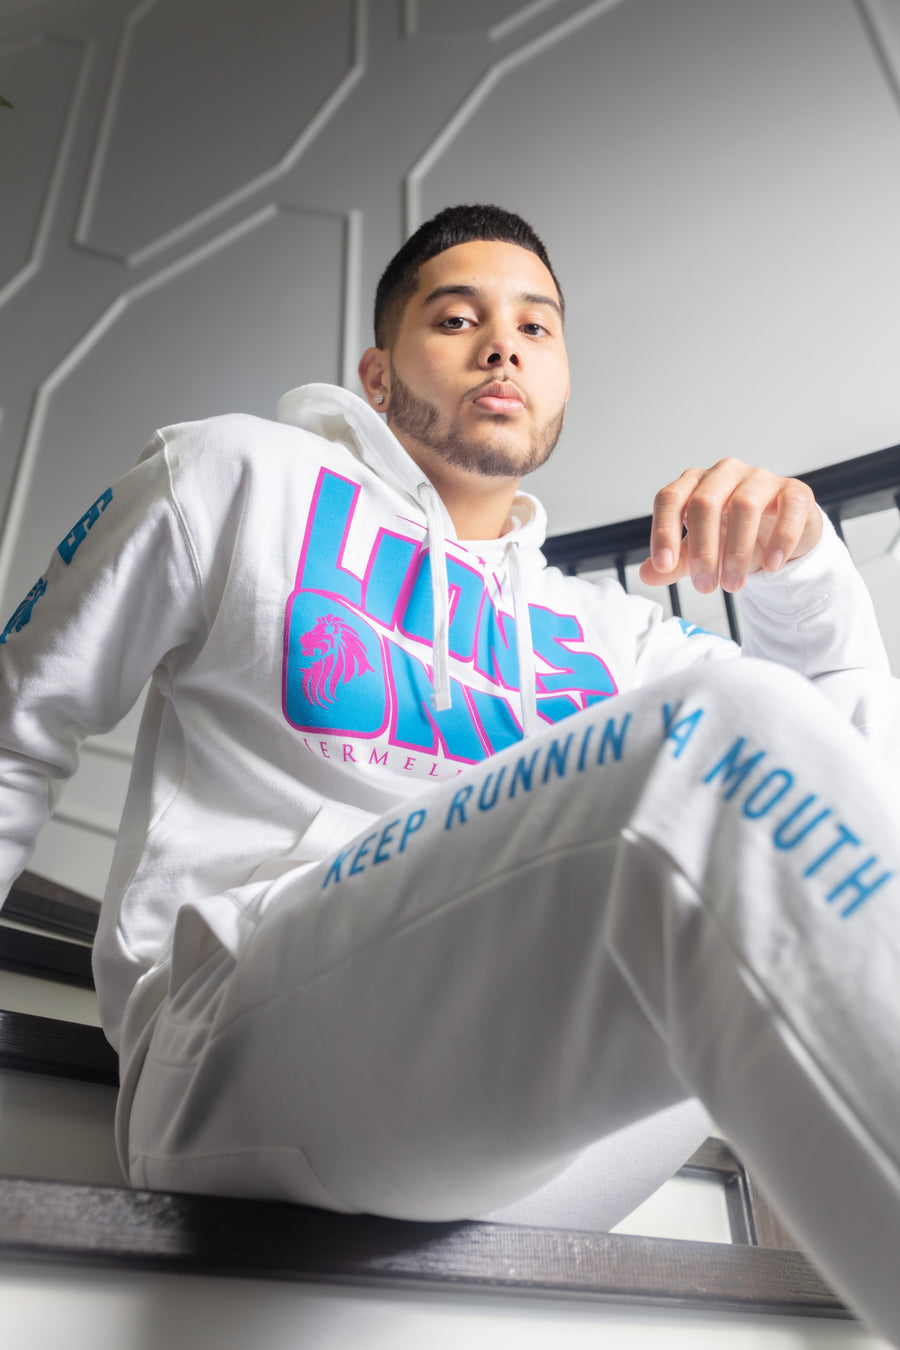 WHITE LionsOnly Track Suits ( Jogger & Hoody) ** (DRY CLEAN ONLY )